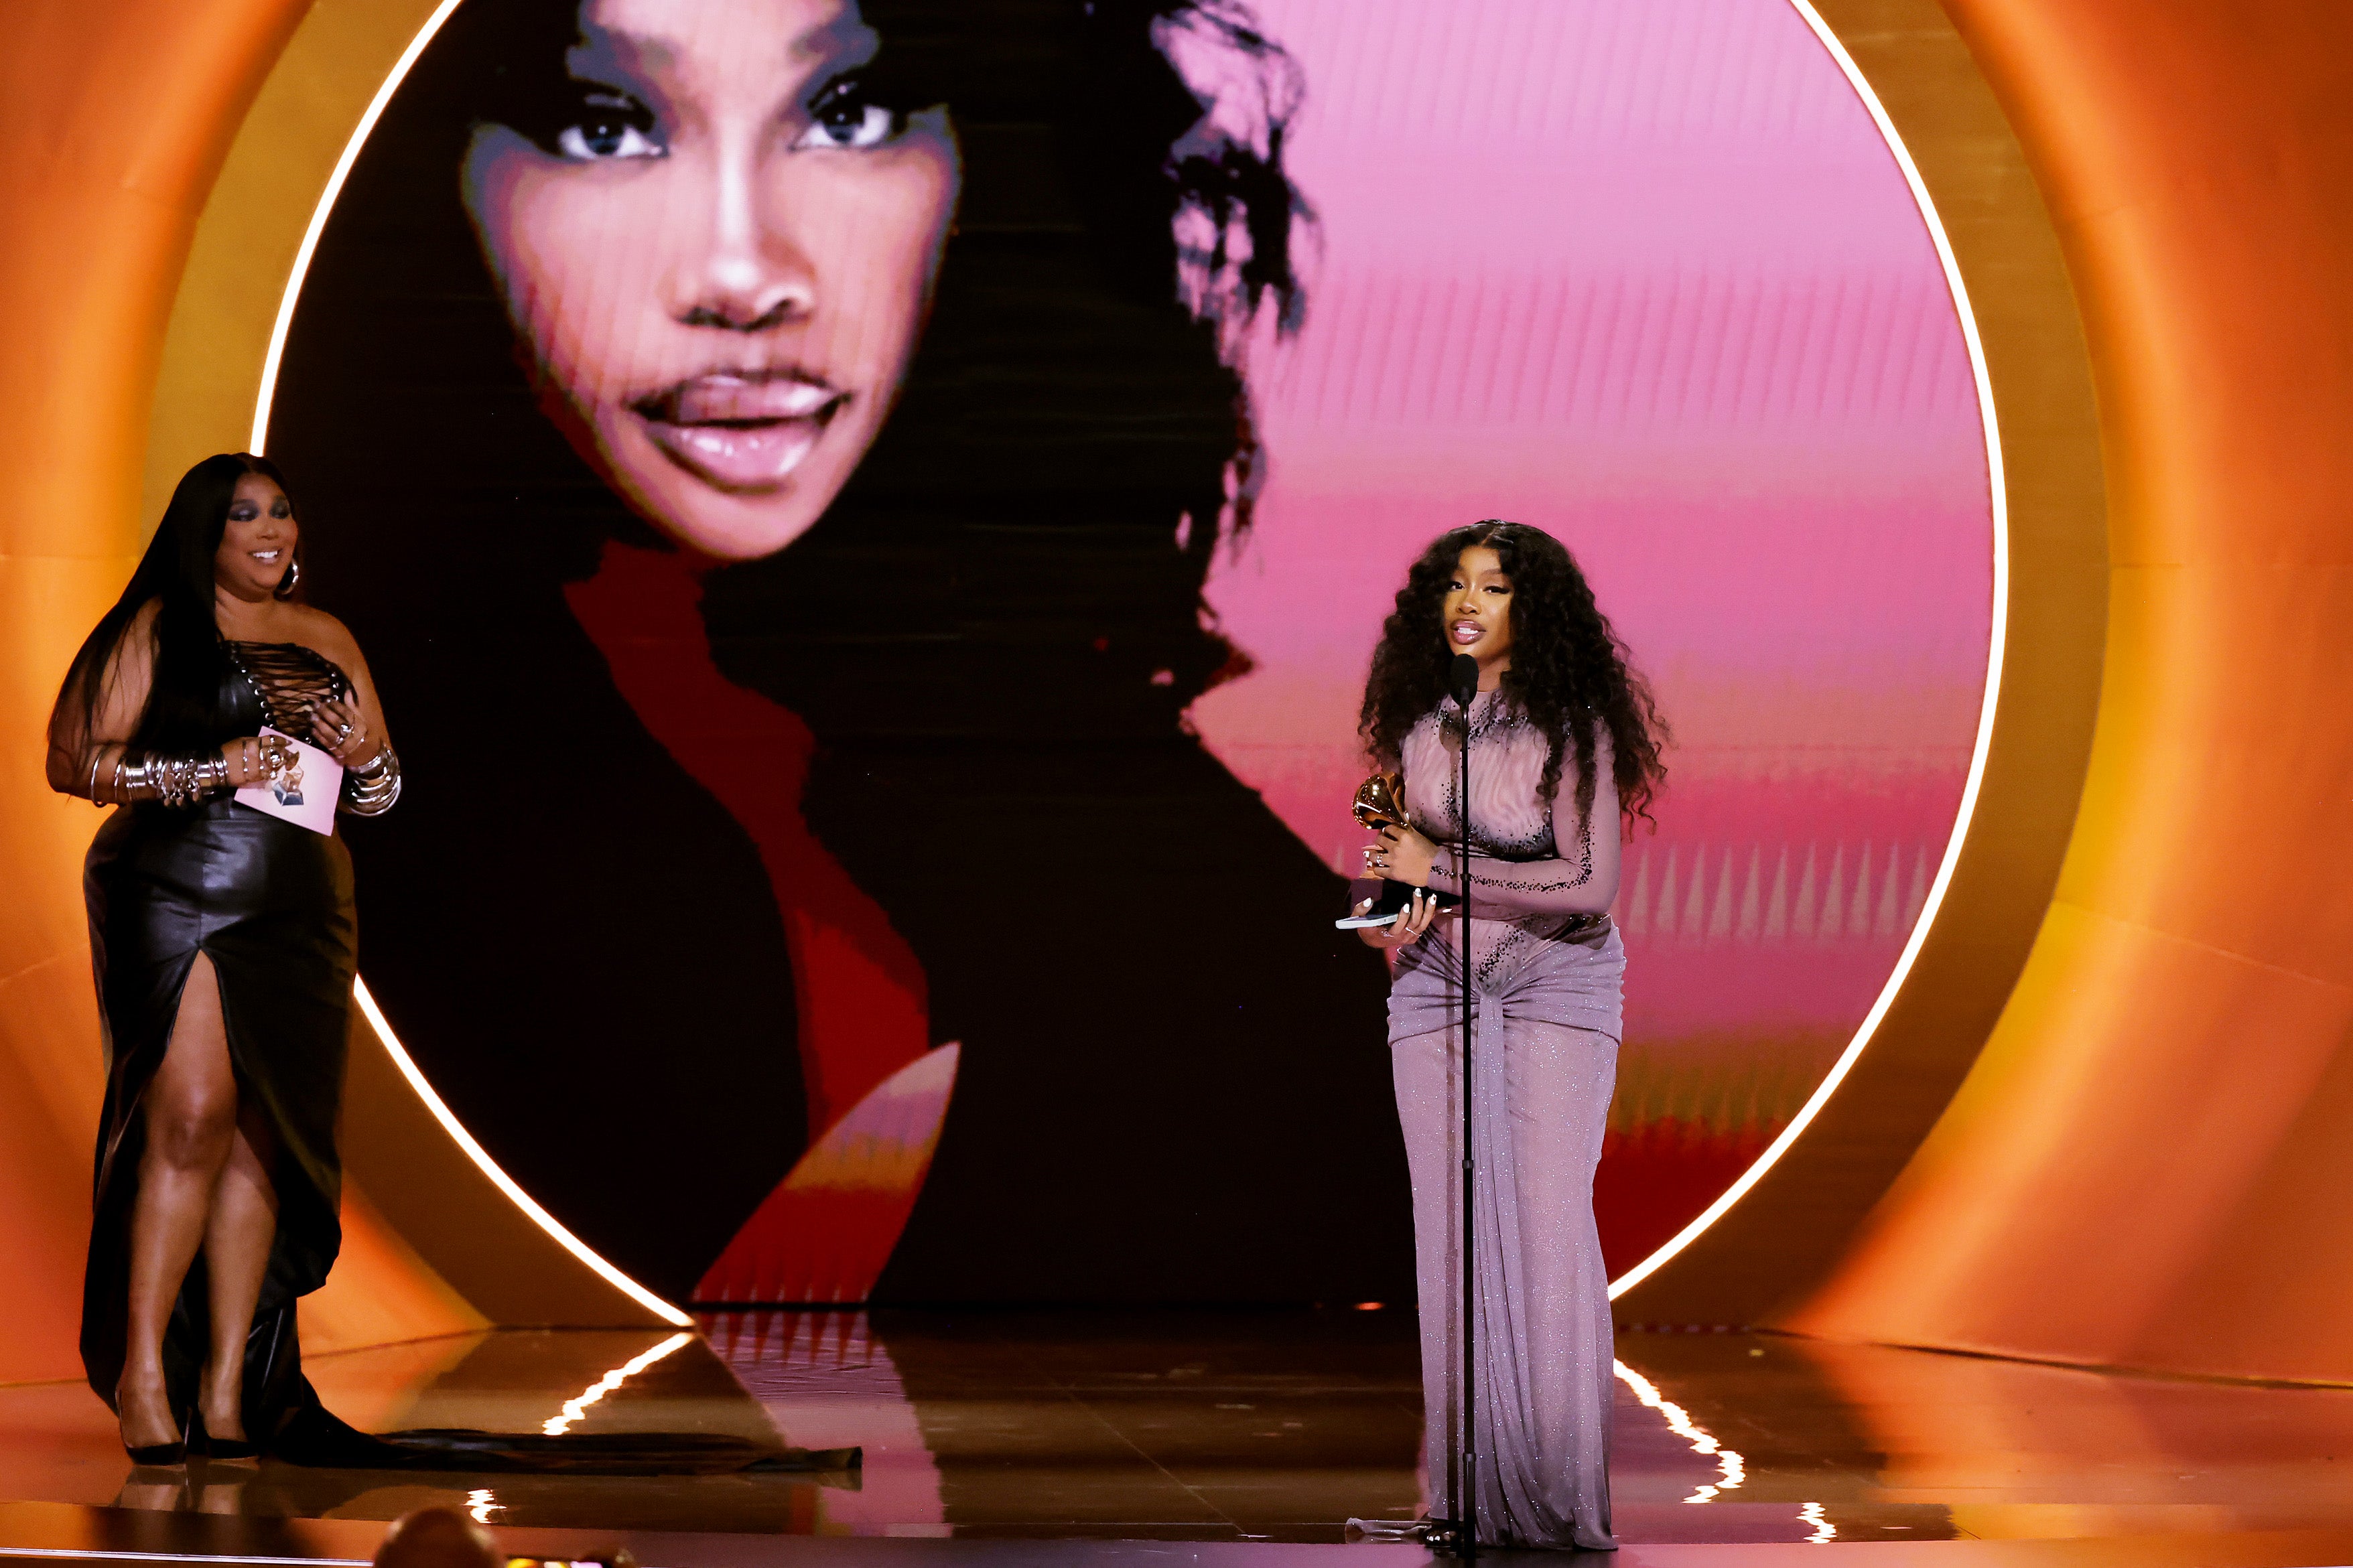 SZA’s song “Snooze” won the Grammy for the Best R&B Song